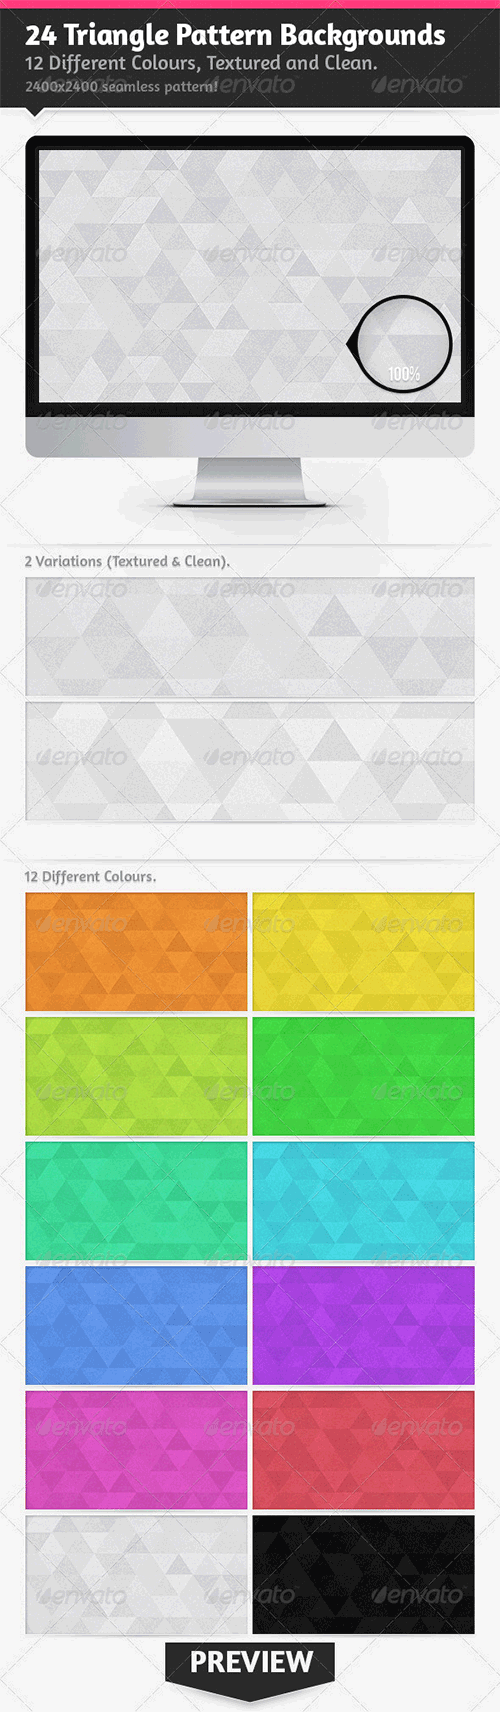 24 triangle pattern backgroundspng